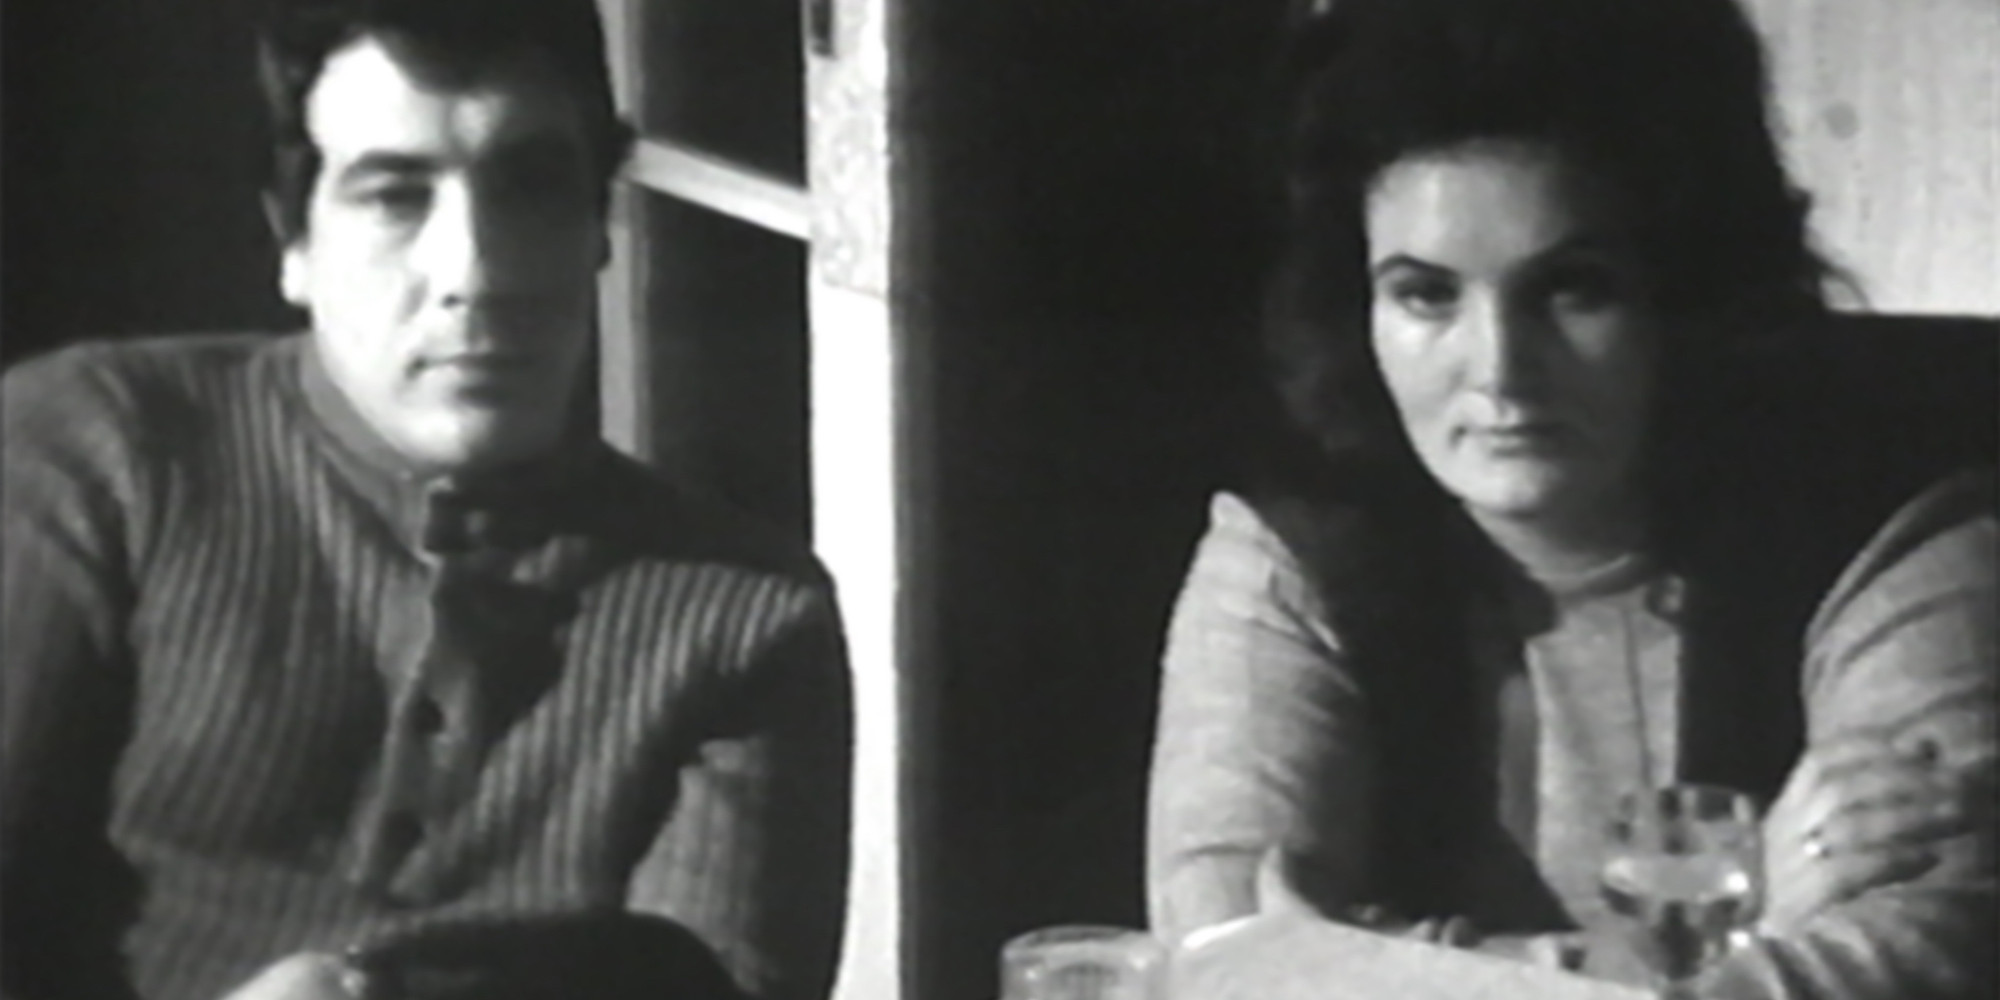 VALIE EXPORT. Facing a Family. 1971. Video (black and white, sound), 4:37 min. The Museum of Modern Art, New York. Gift of VALIE EXPORT and Miryam and Daniel Charim. © 2021 VALIE EXPORT